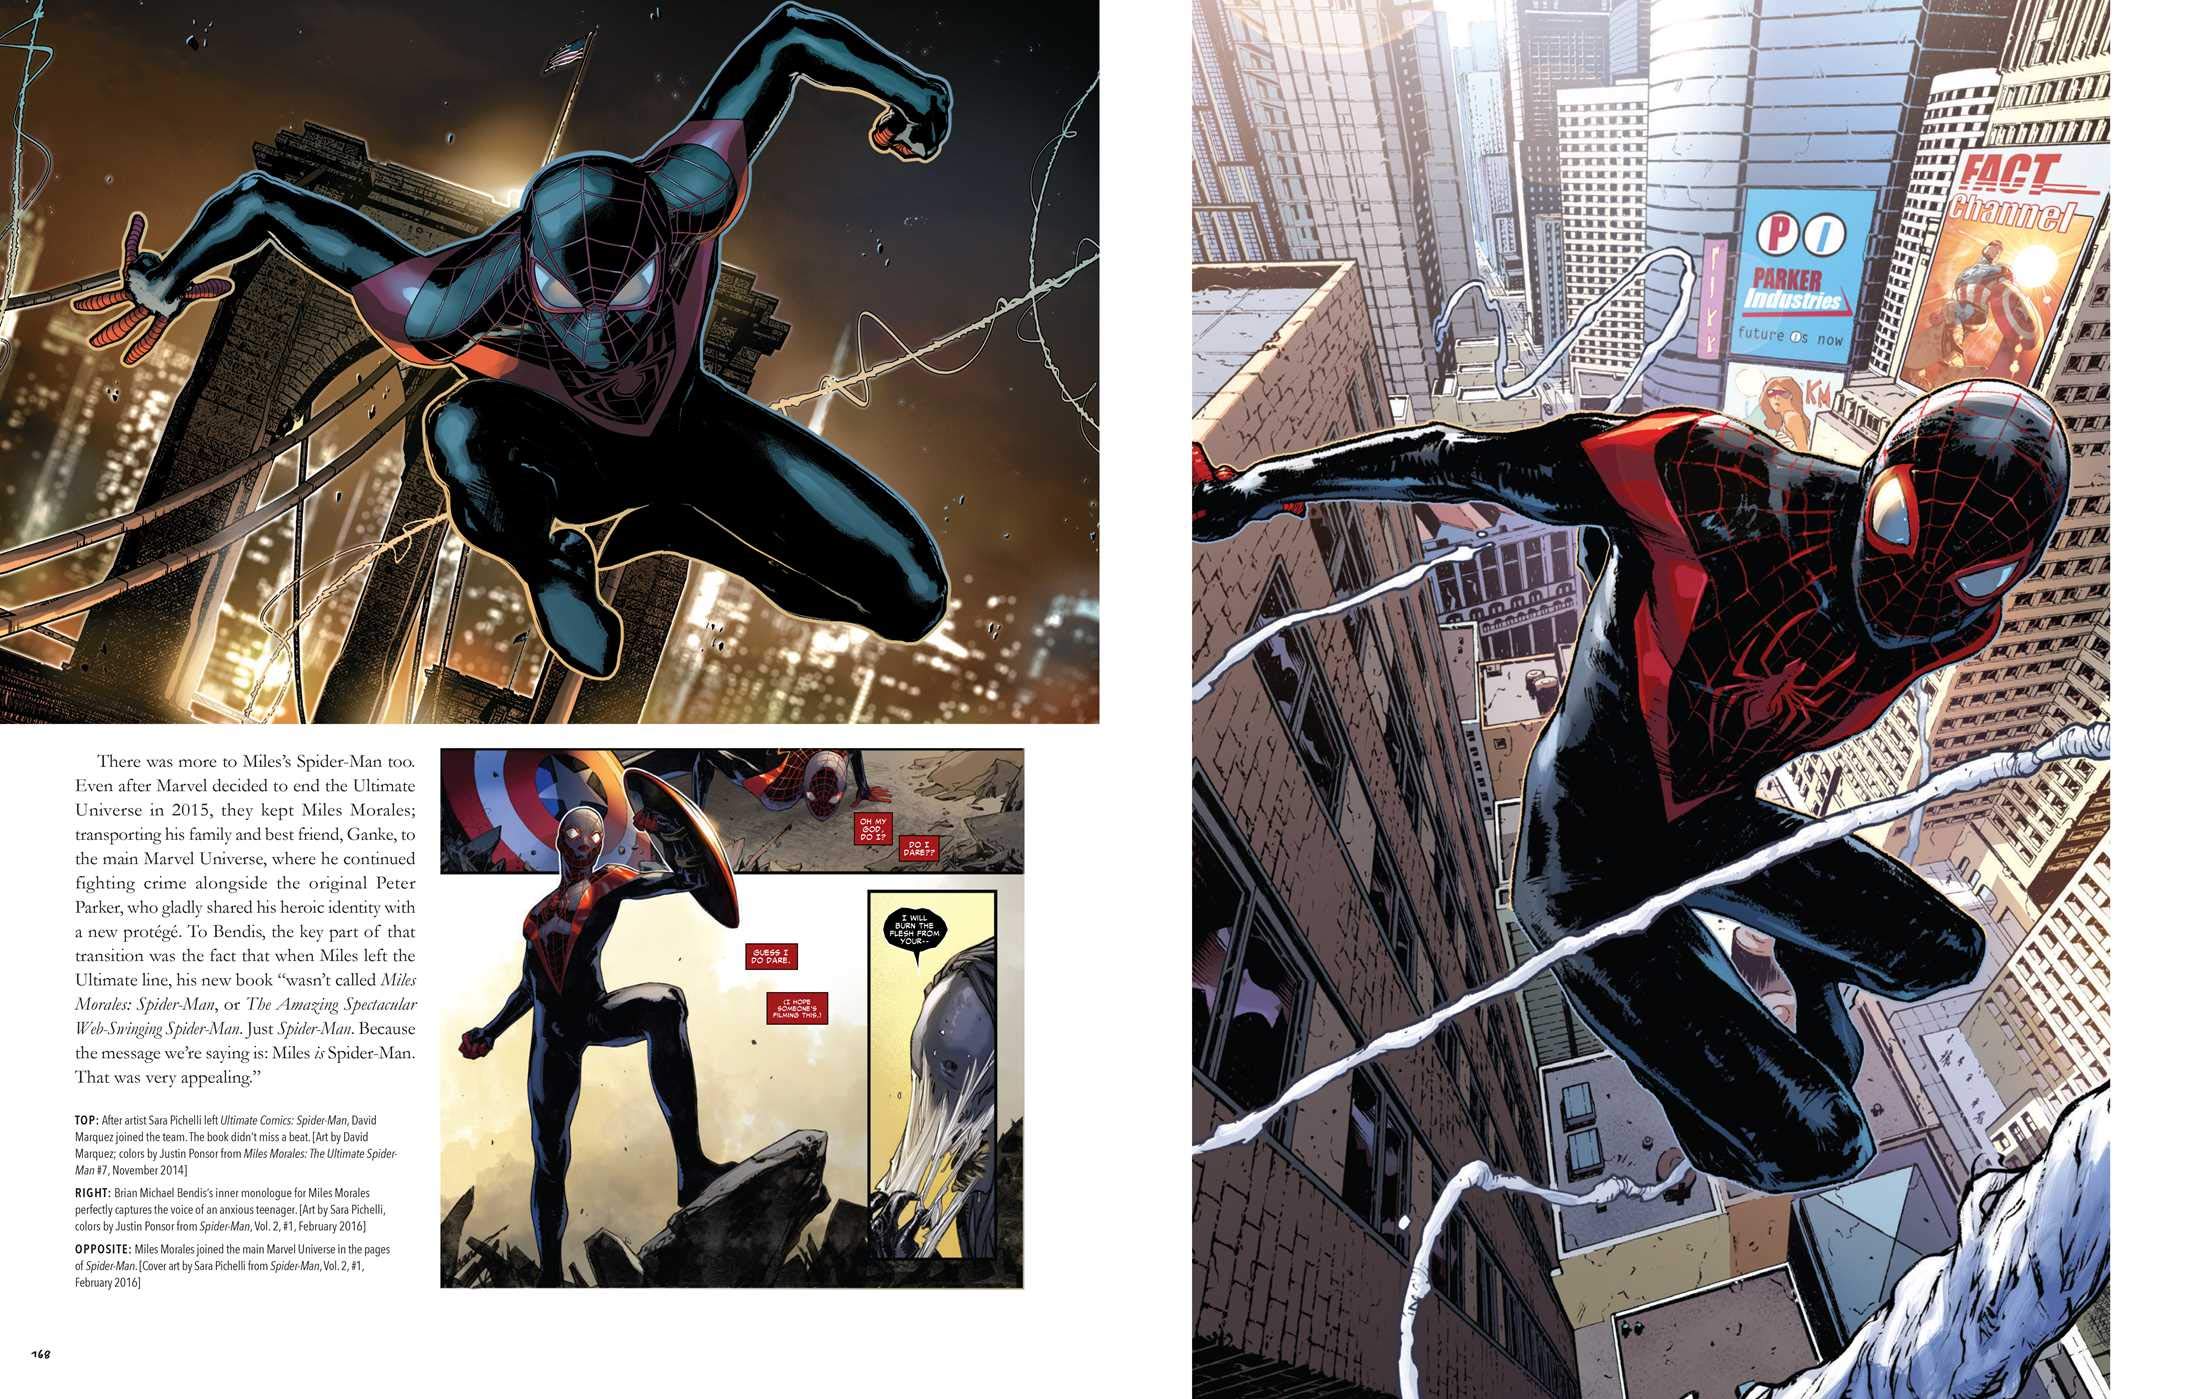 Marvel's Spider-Man: From Amazing to Spectacular: The Definitive Comic Art Collection